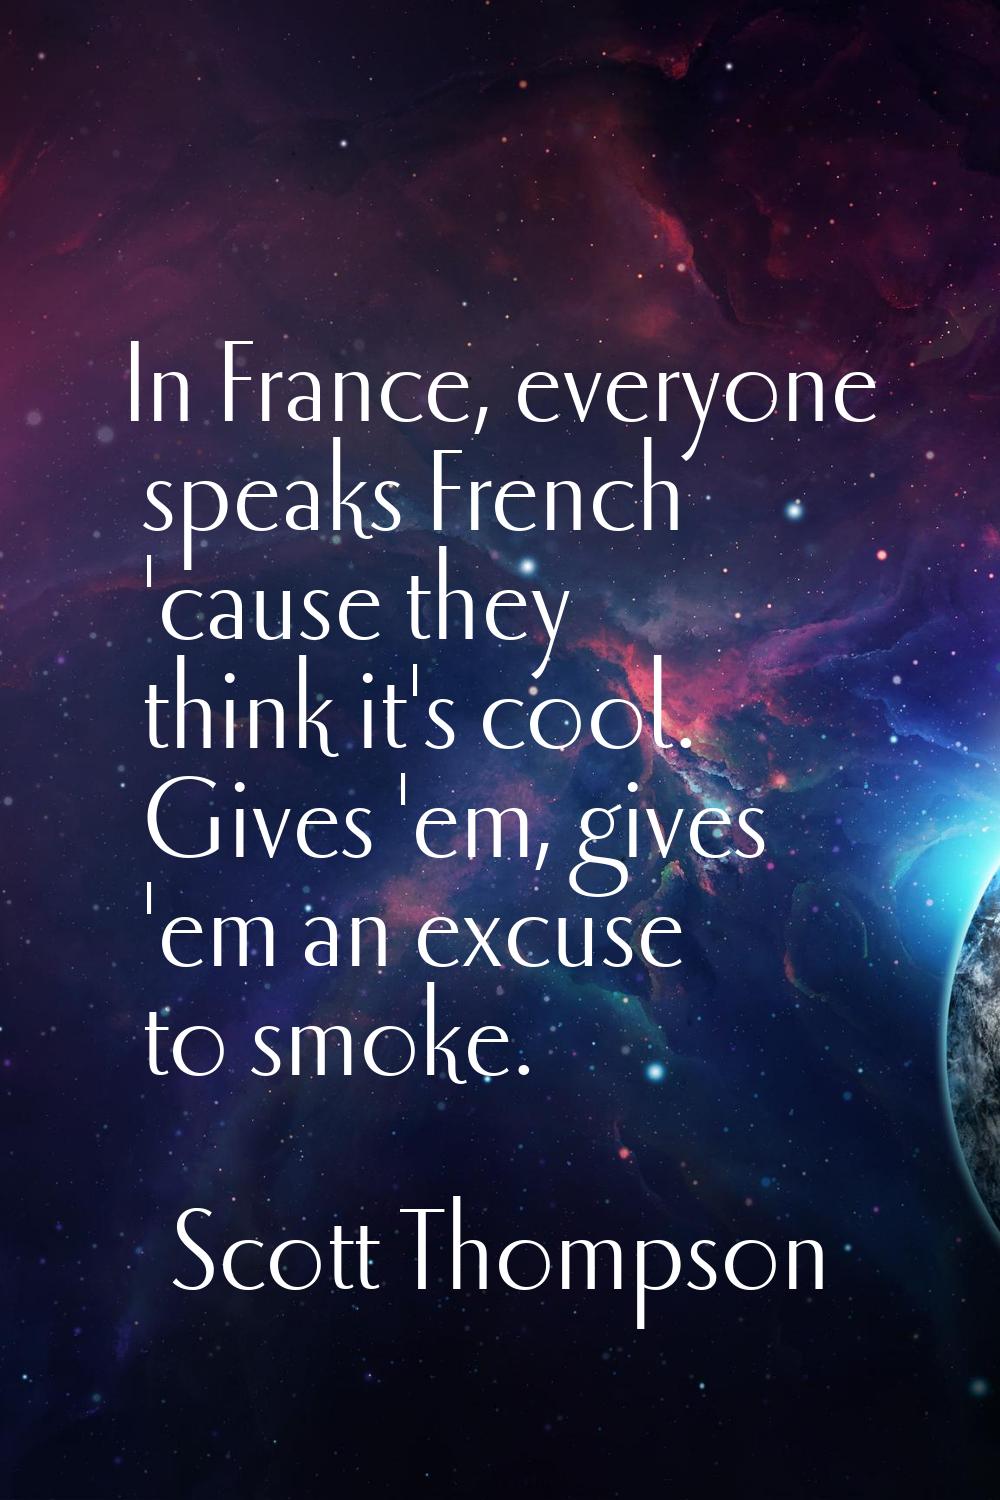 In France, everyone speaks French 'cause they think it's cool. Gives 'em, gives 'em an excuse to sm